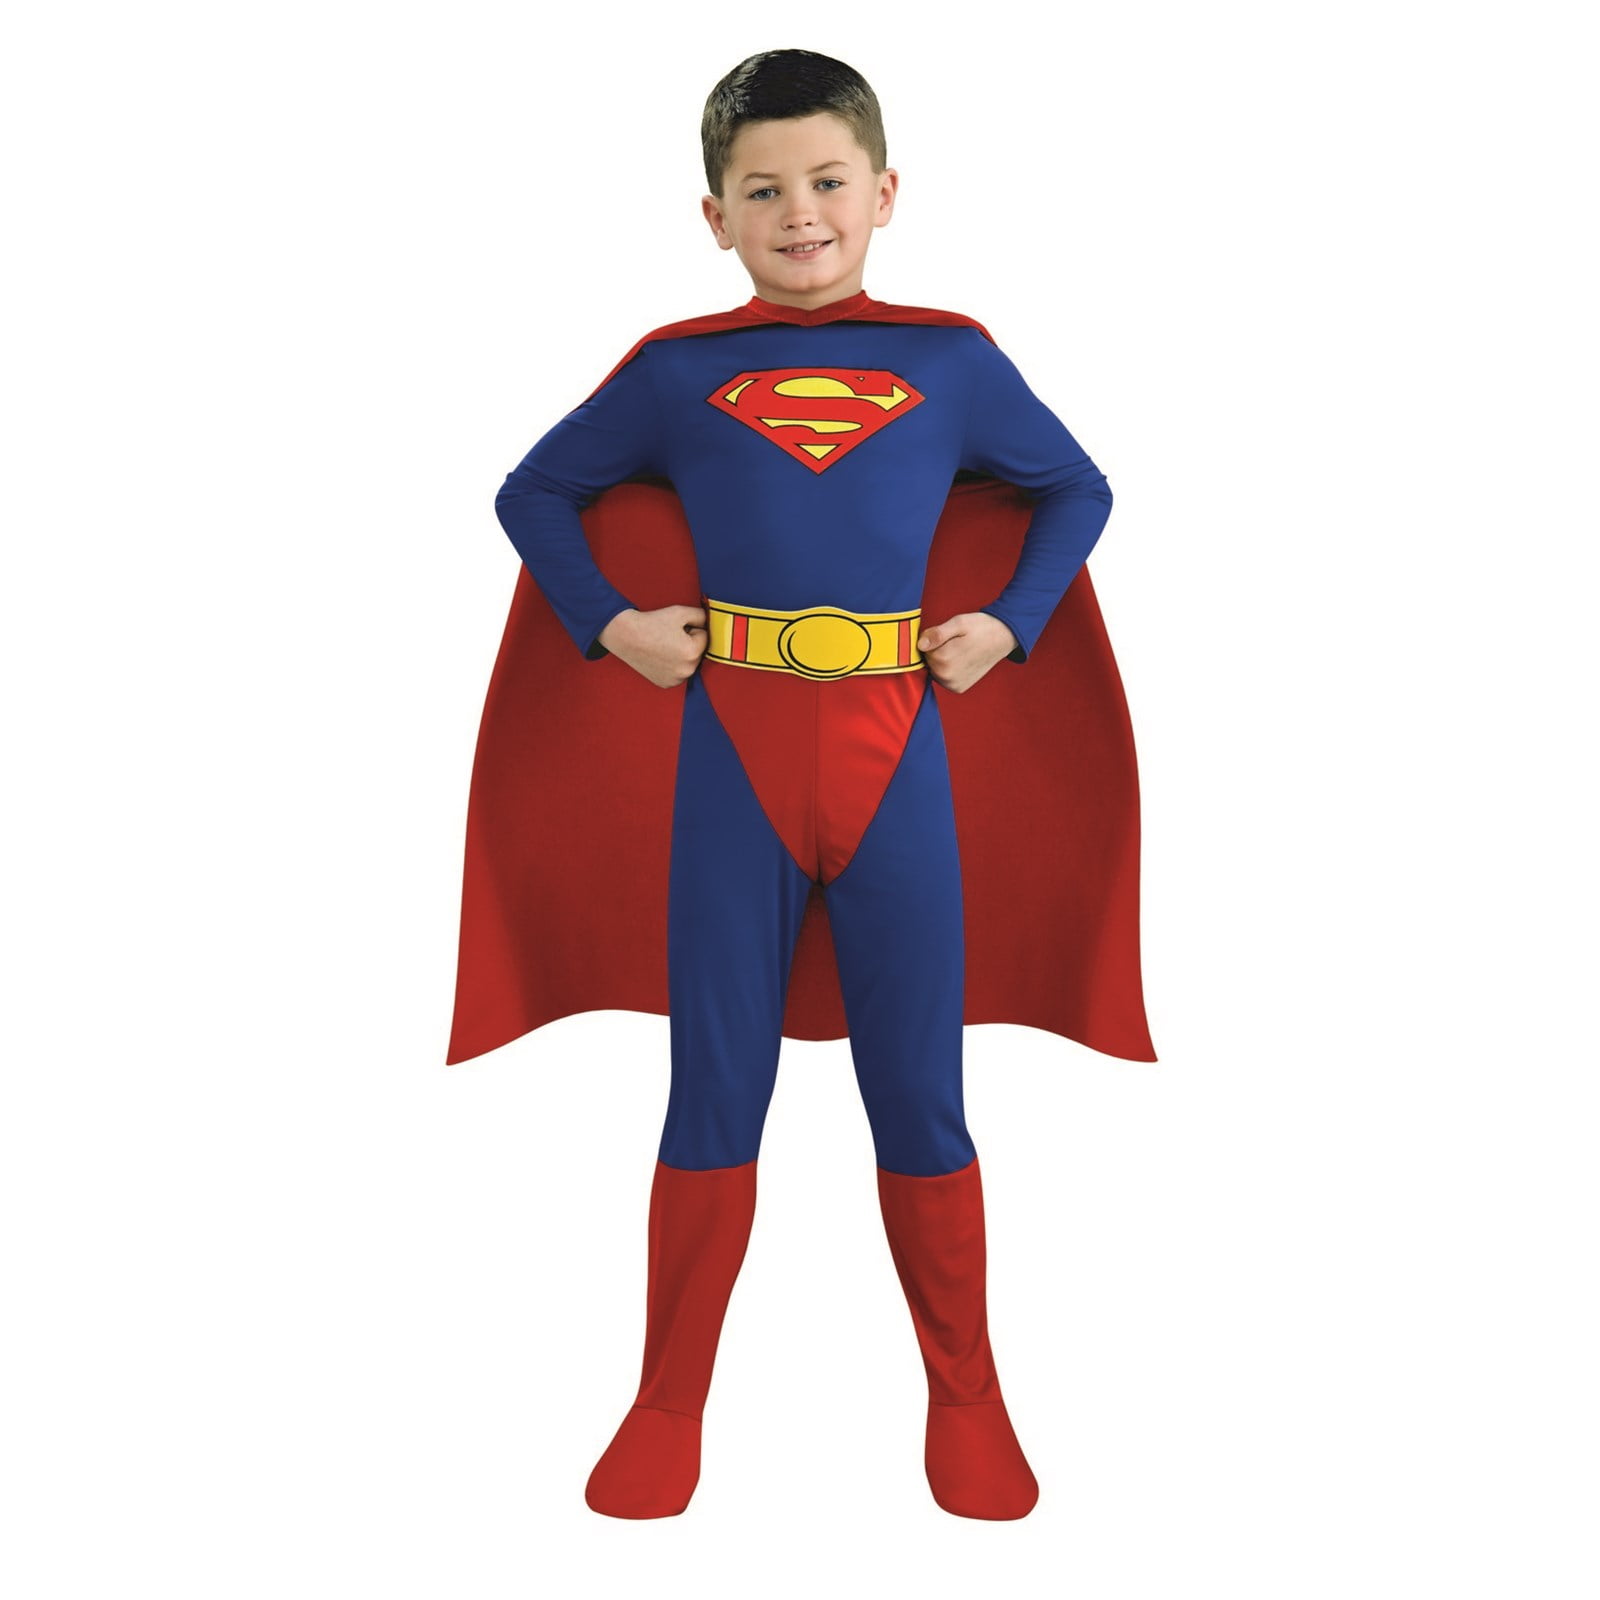 Justice Superman Costume - Baby  Kids costumes, Halloween costumes for  kids, Boy halloween costumes